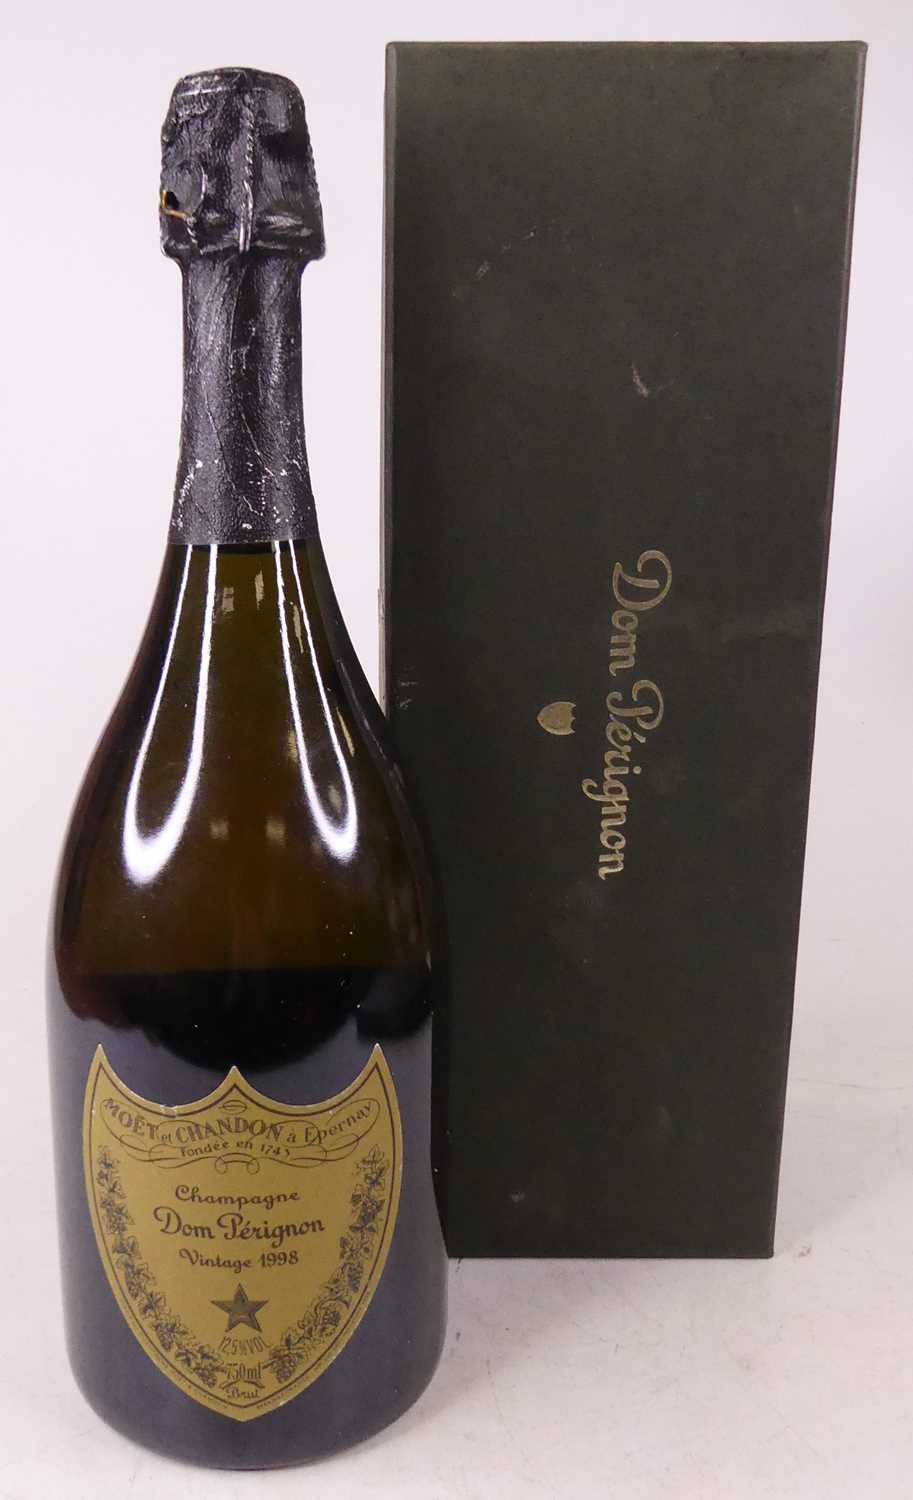 Moet & Chandon Dom Perignon vintage champagne, 1998, one bottle in carton with supporting volume Dom